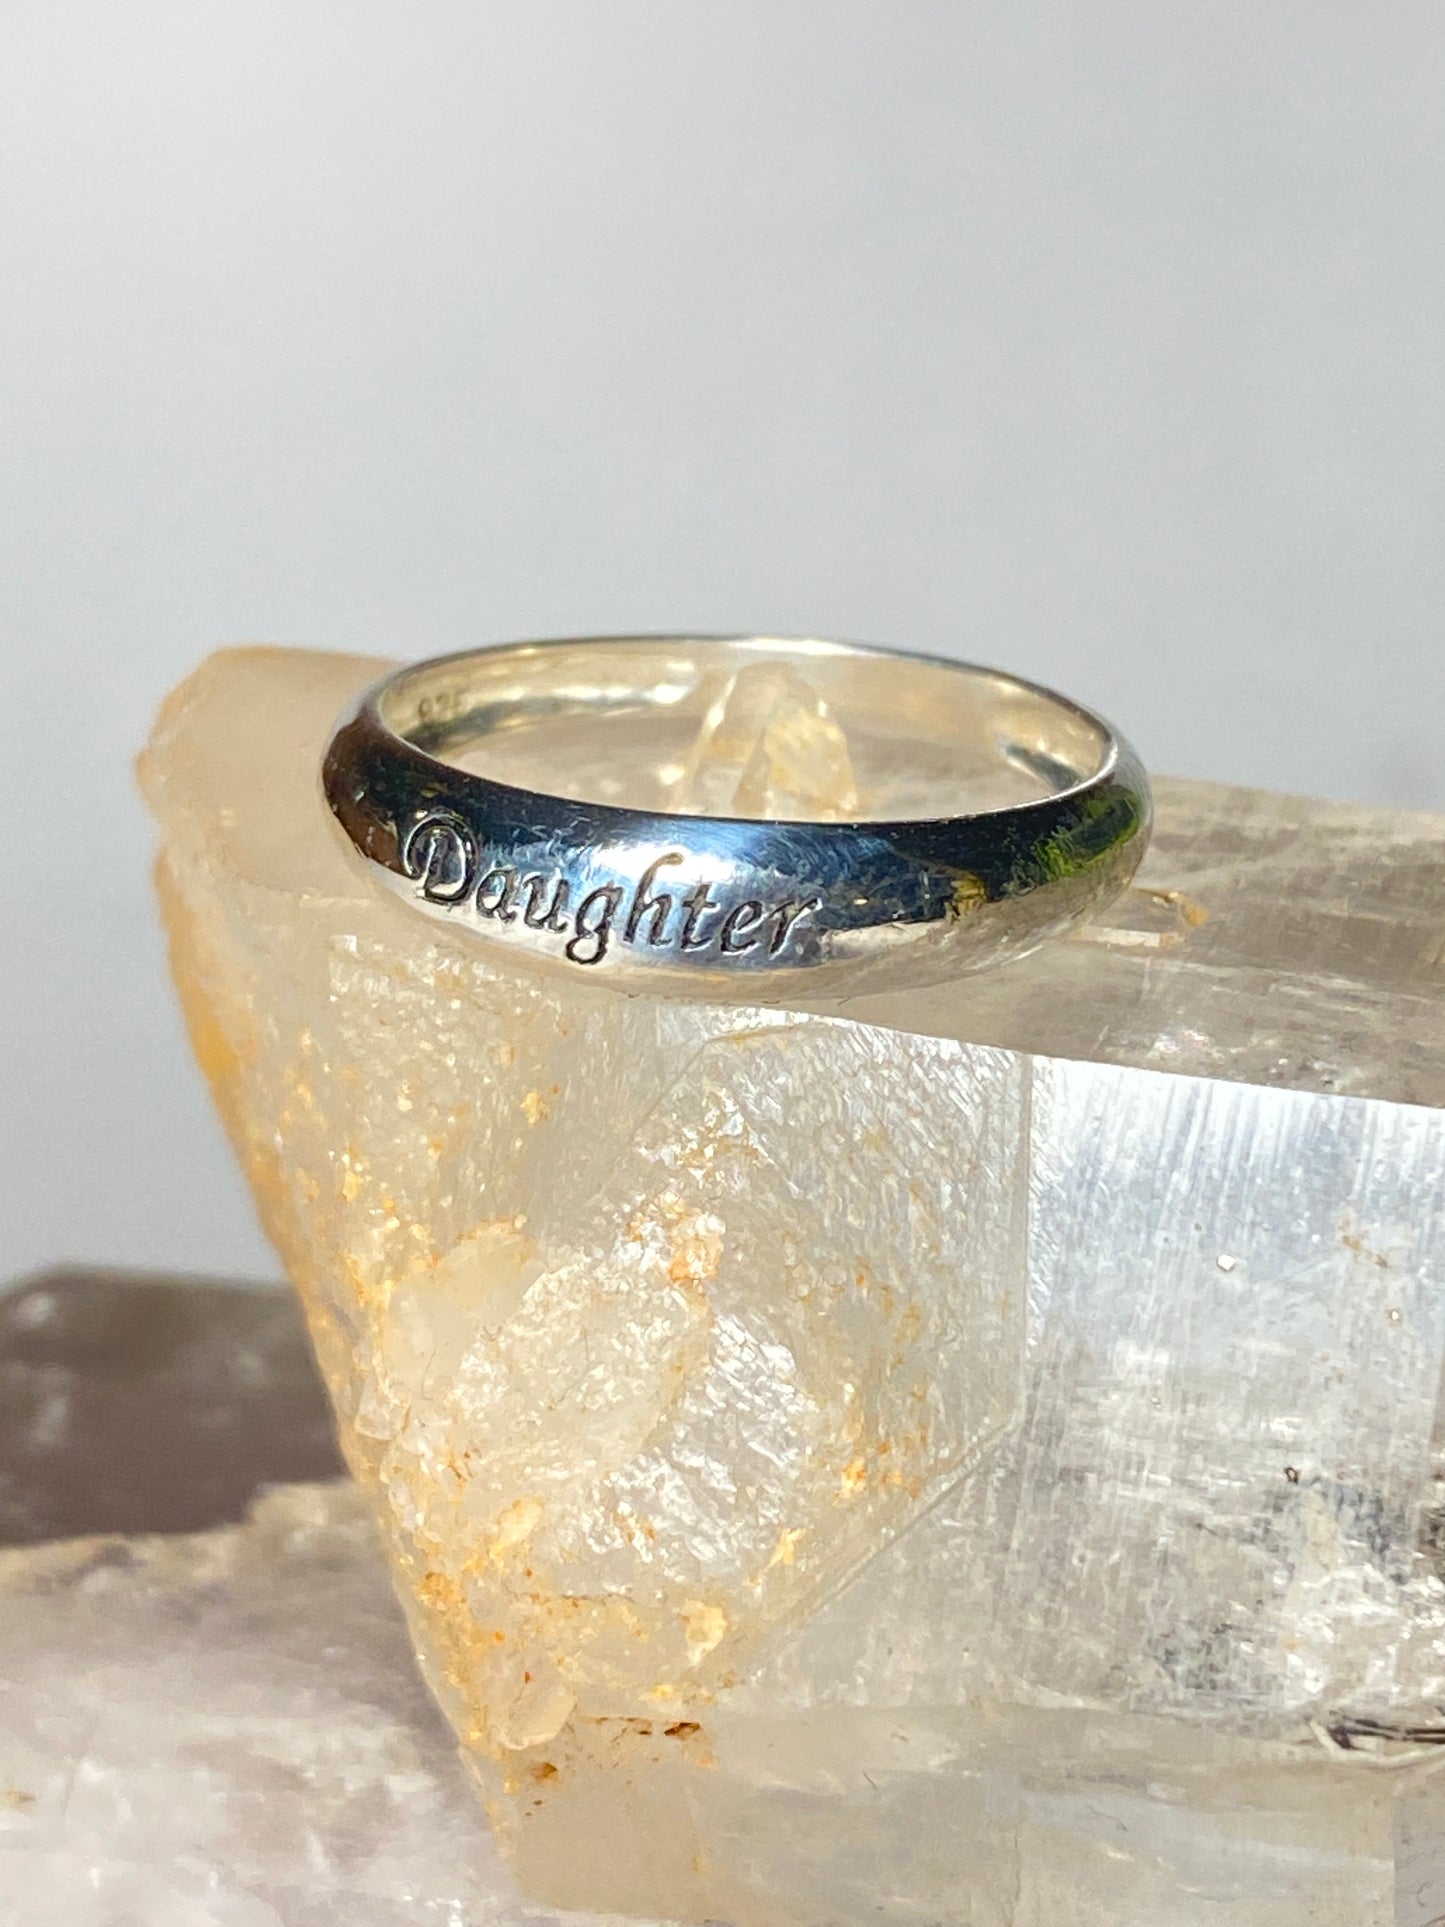 Daughter Ring word band love friendship sterling silver women daughters girls